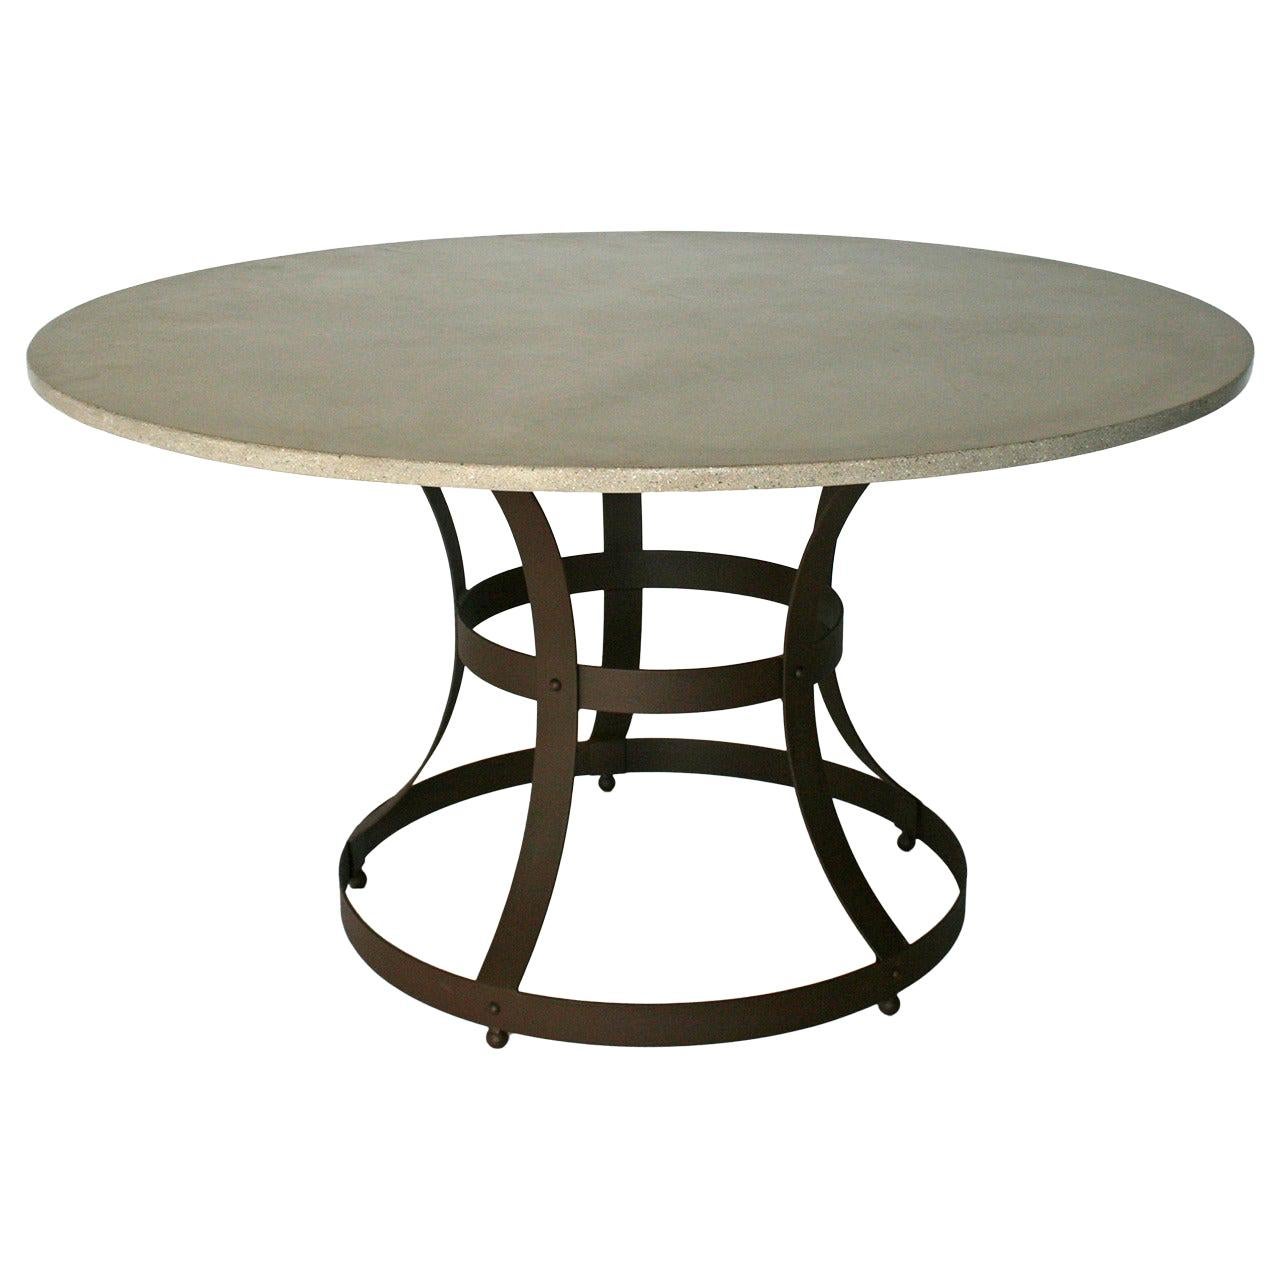 James de Wulf Concrete Hourglass Dining Table, Available Now For Sale